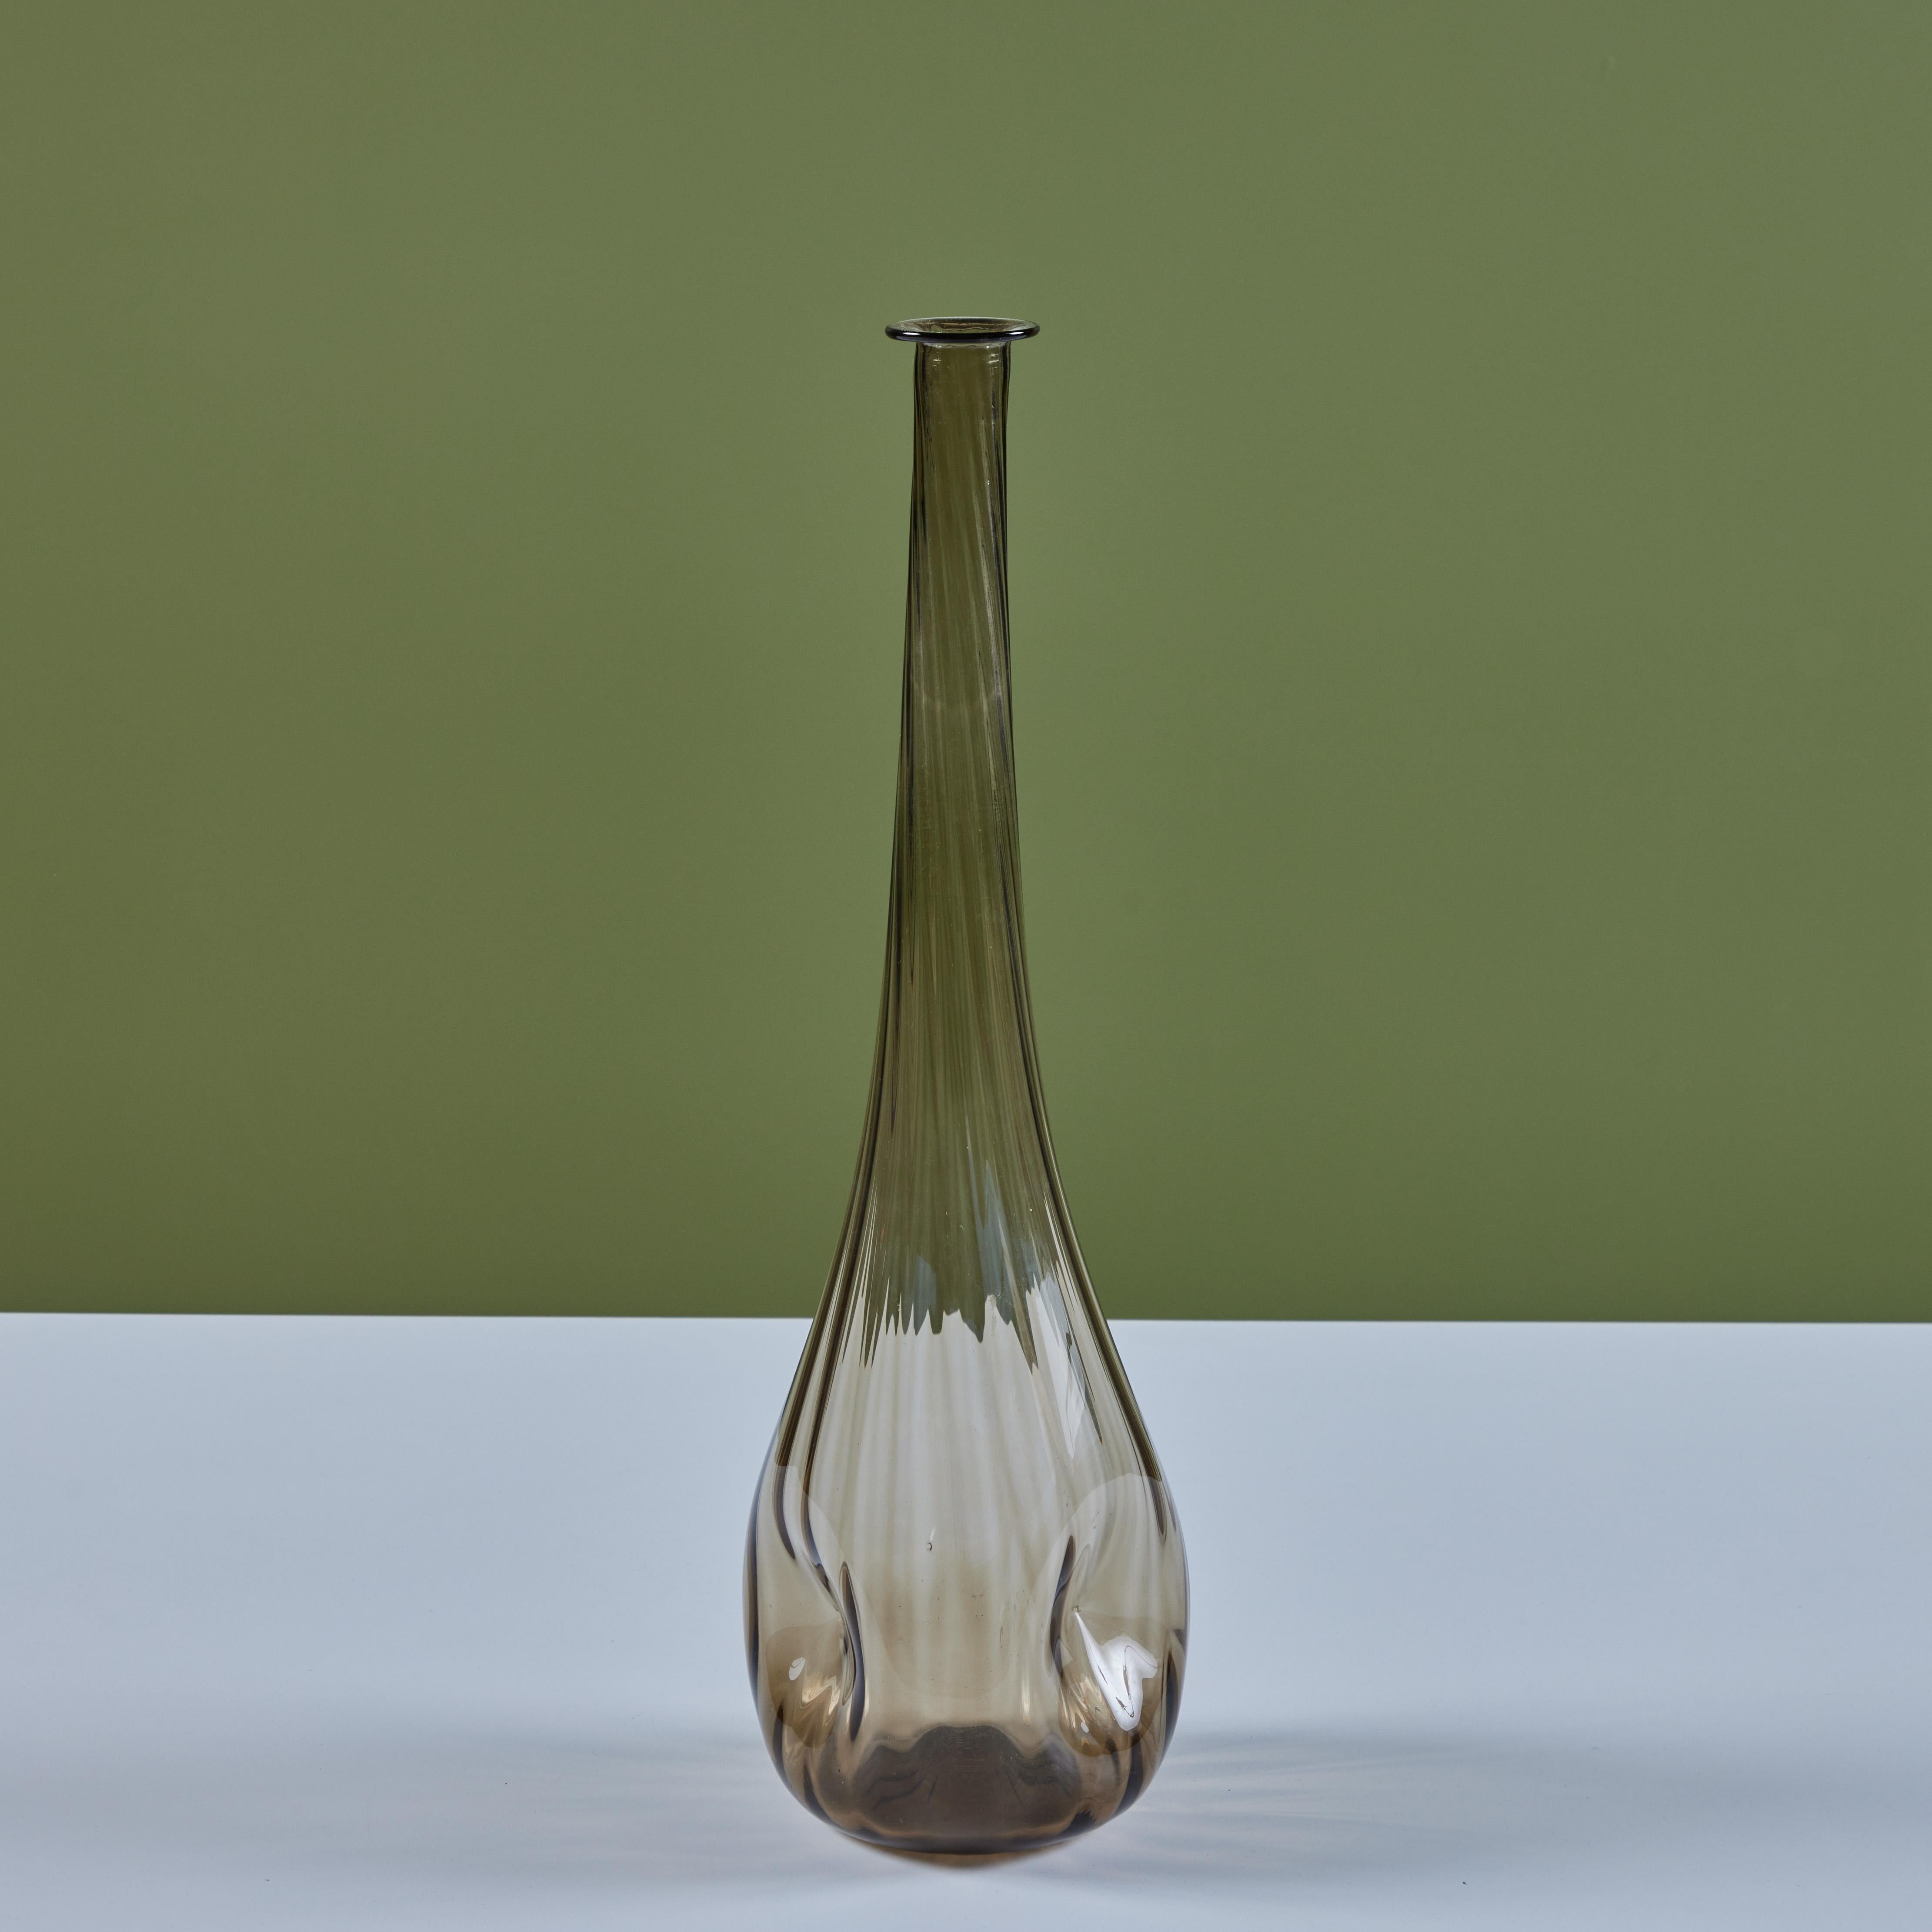 Tall smoked glass vessel or decanter. This piece features a smoked blown glass vessel with rounded bottom and slender neck. The glass has an all over ribbing that spirals at the neck with three dimples around the sides of the glass